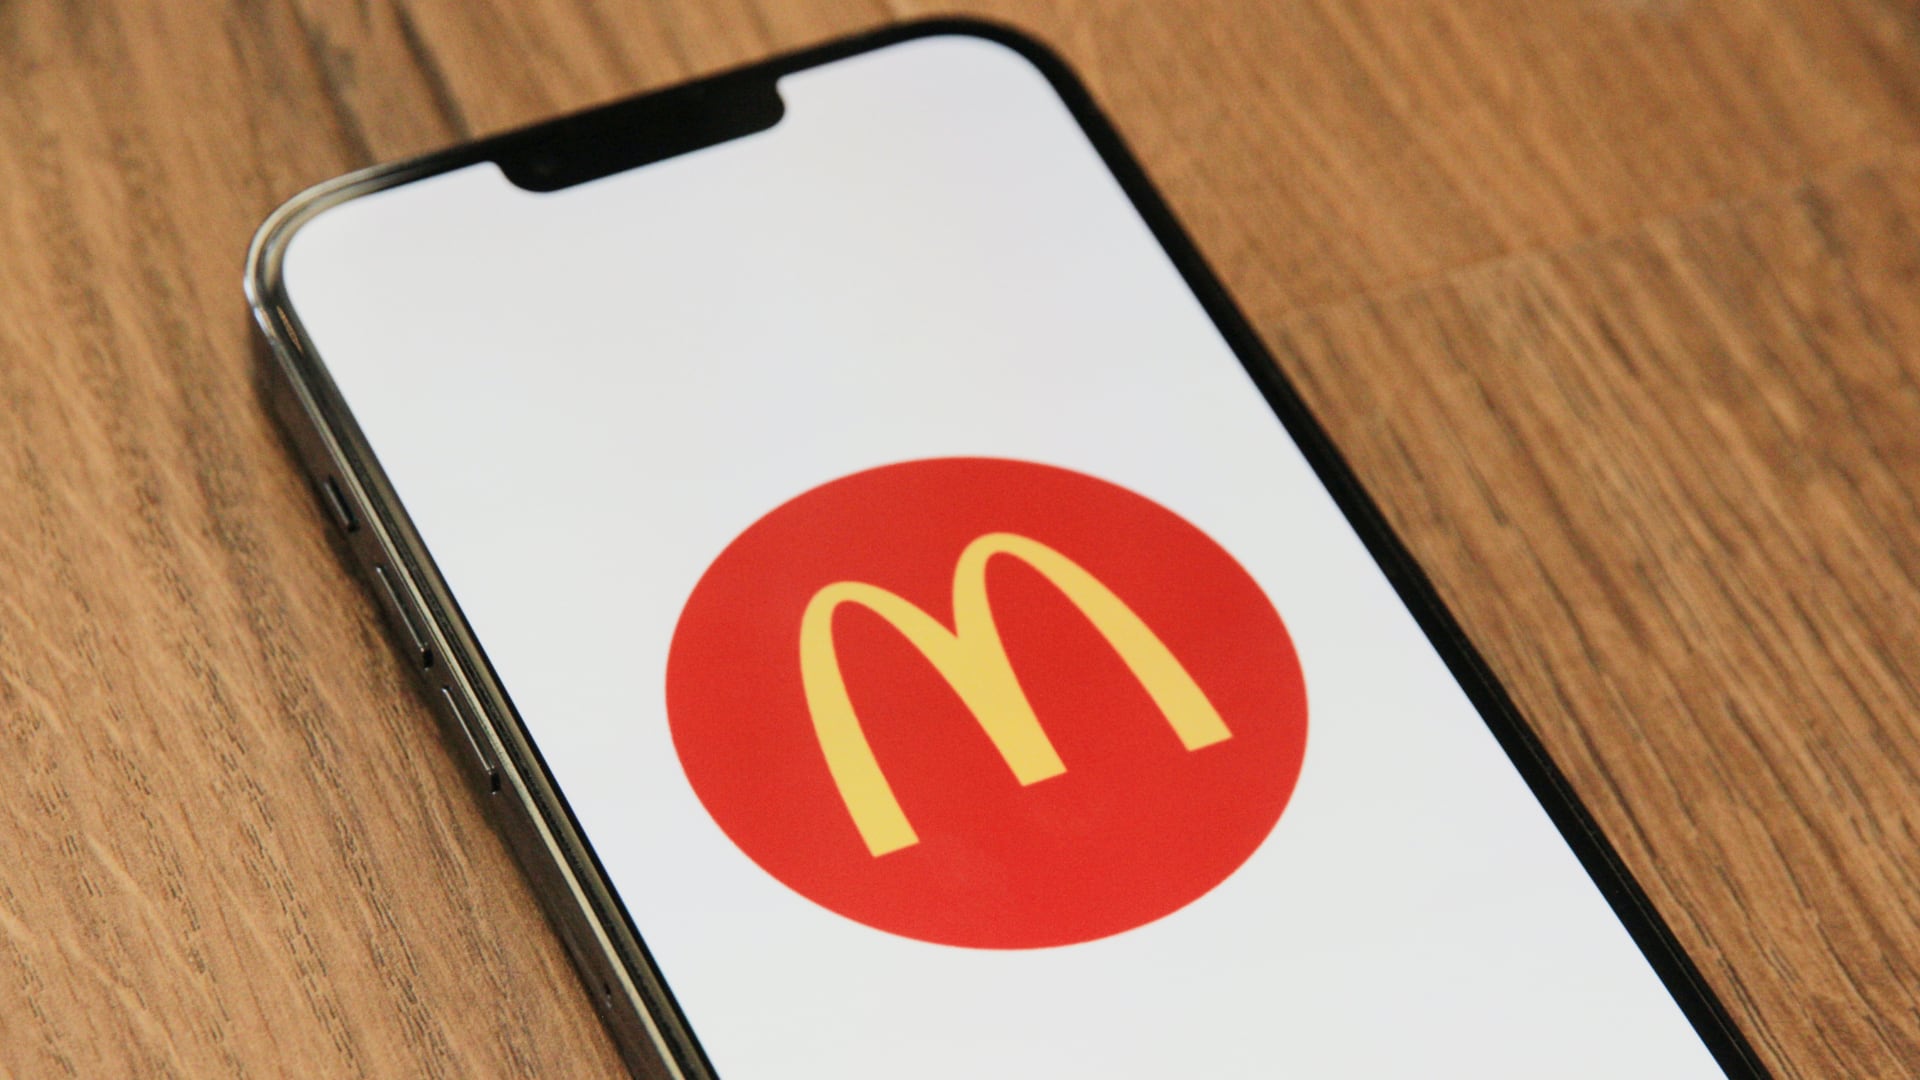 iPhone resting on a wooden table, showing the McDonald's logo